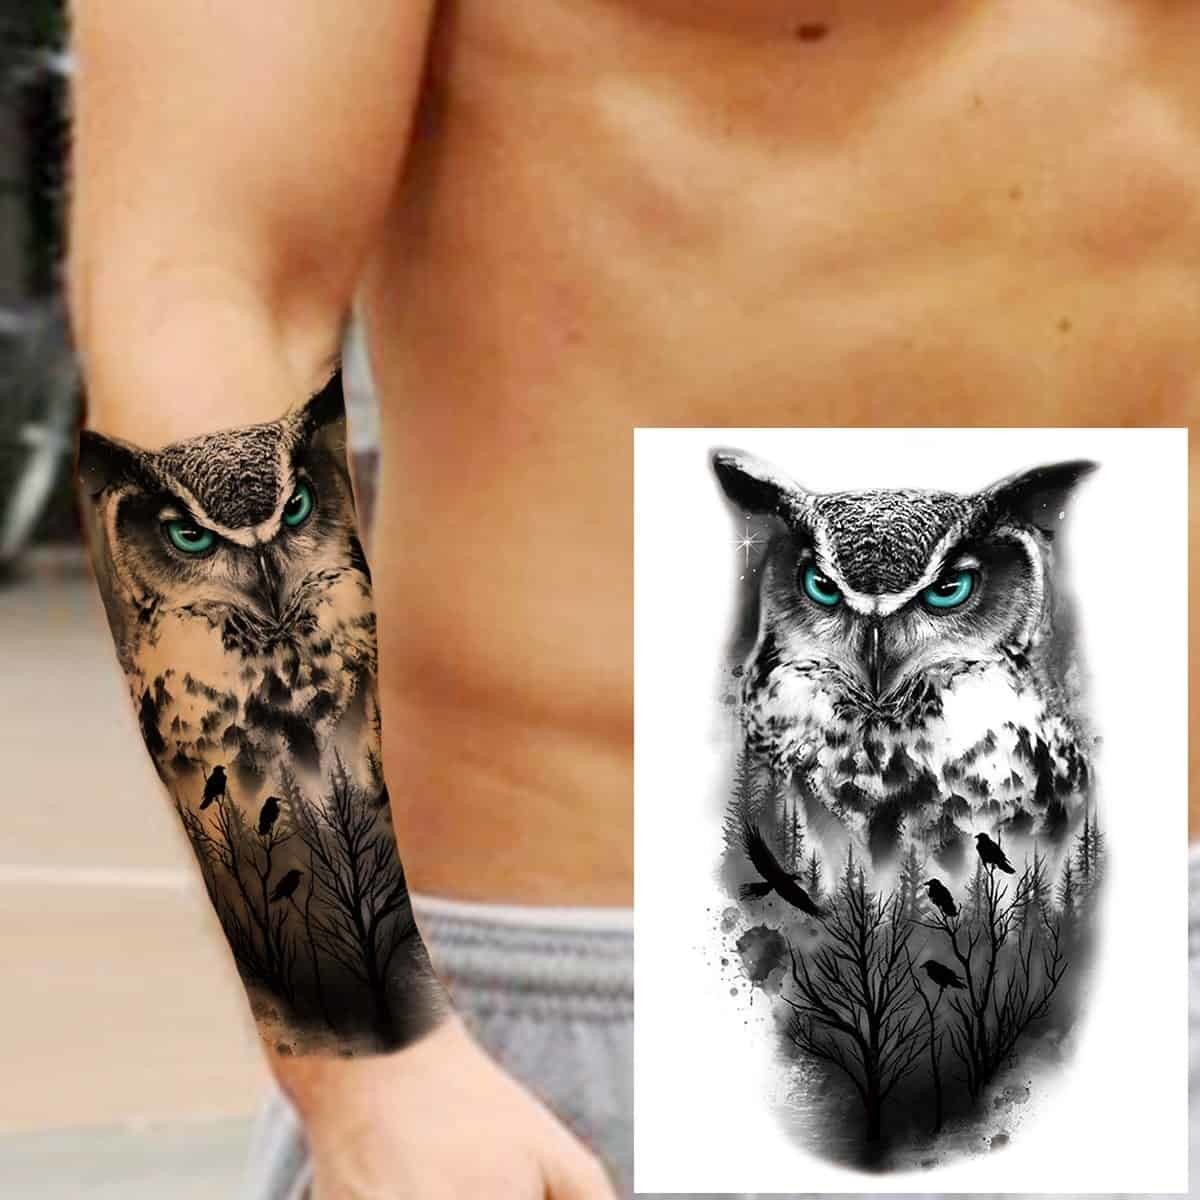 Aggregate more than 81 significance of owl tattoo latest  thtantai2